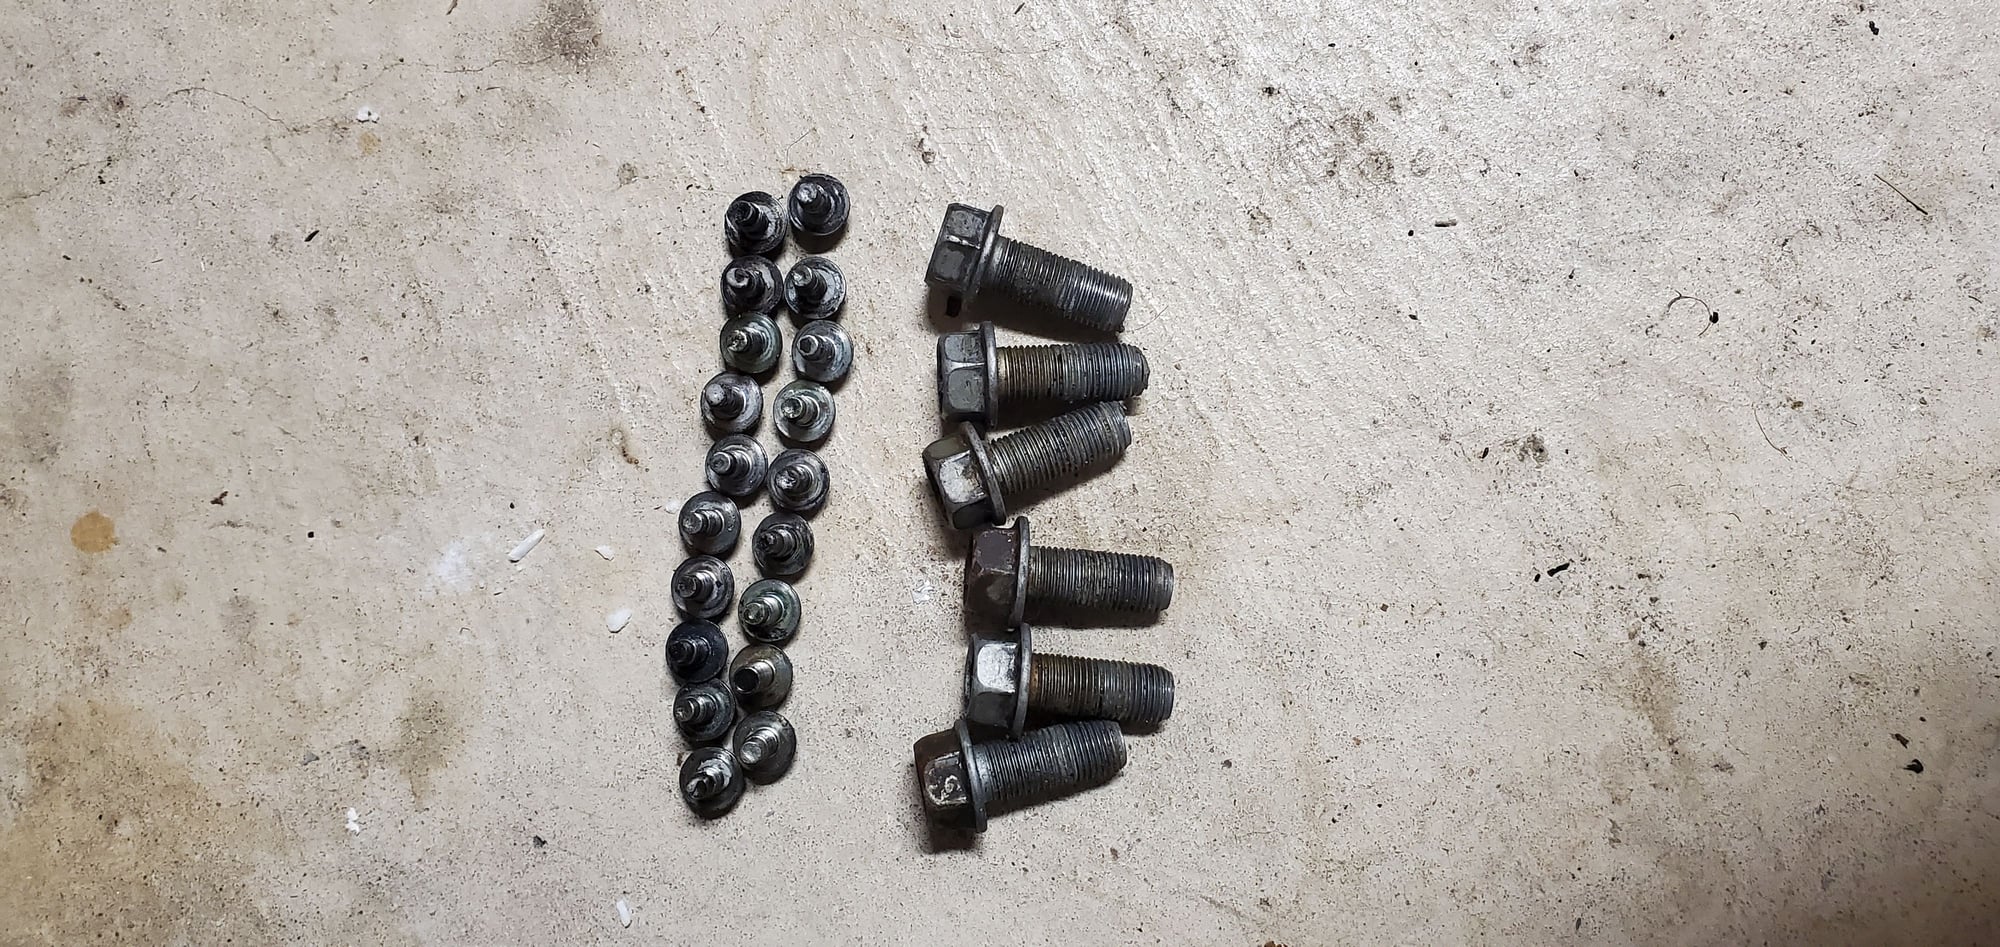 Miscellaneous - Oil pan and engine mounts bolts - Used - 1993 to 1999 Mazda RX-7 - Austin, TX 78738, United States